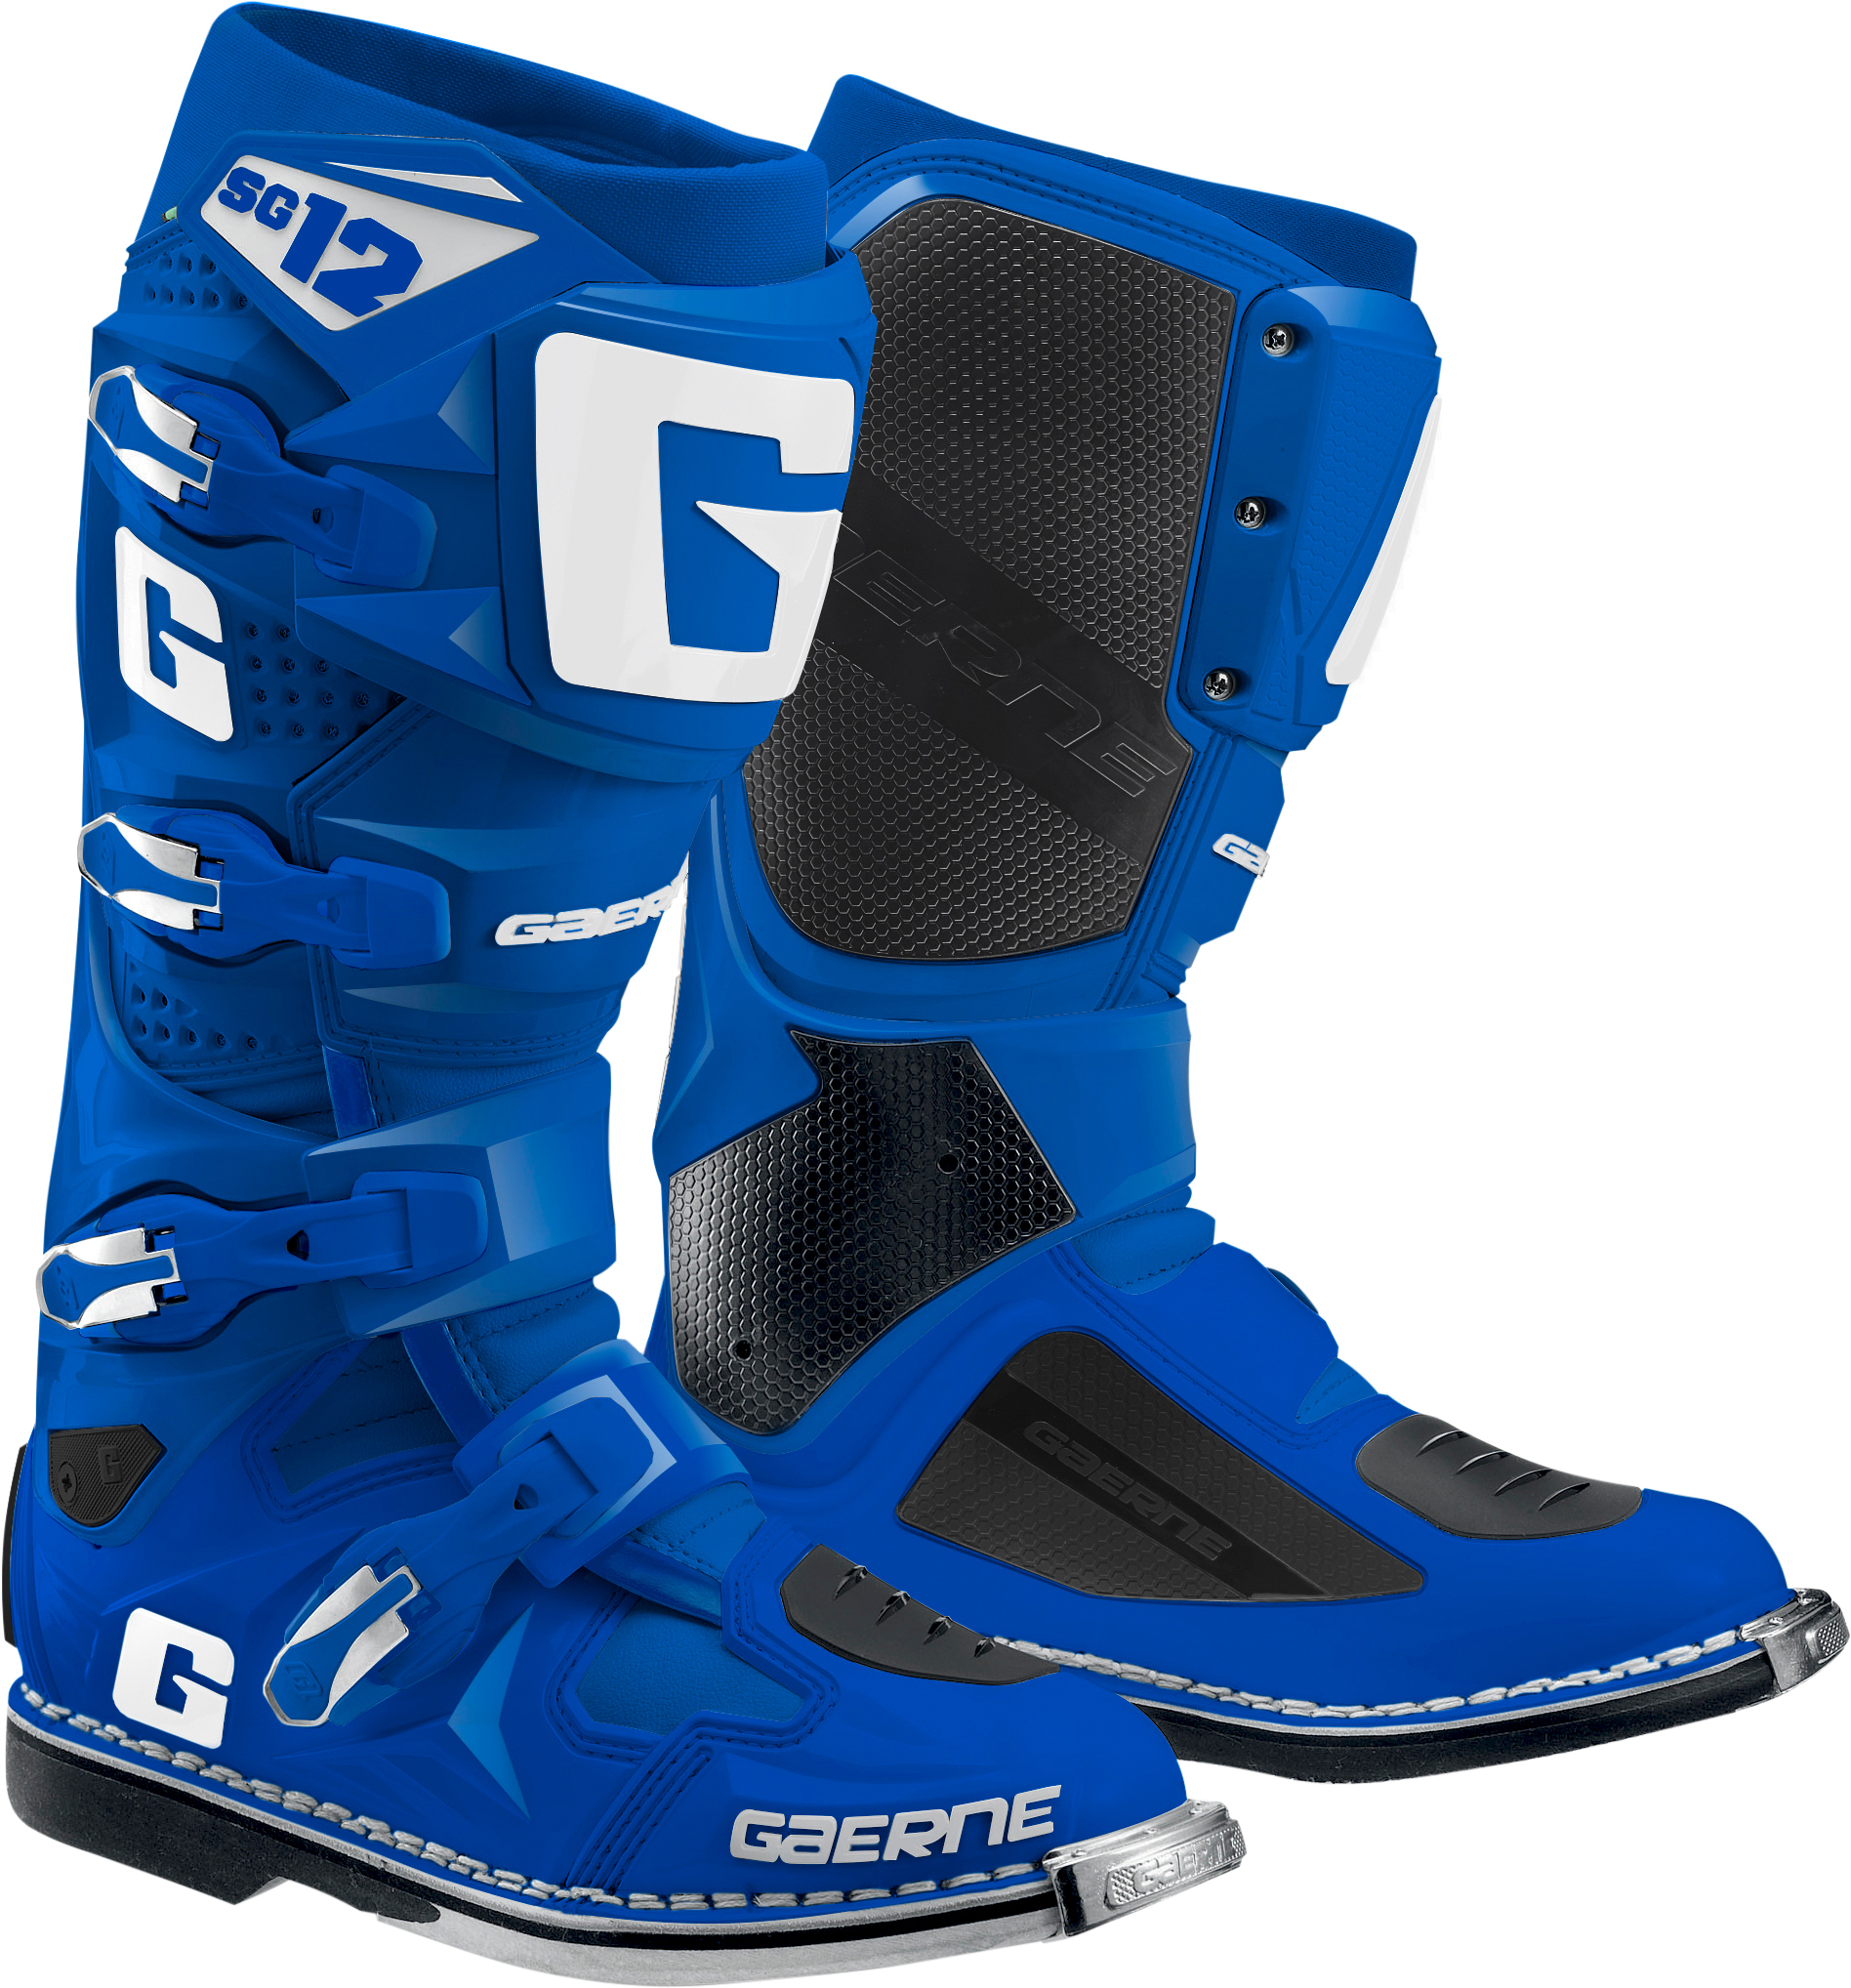 SG-12 Boots - Solid Blue, Size 11 - Click Image to Close